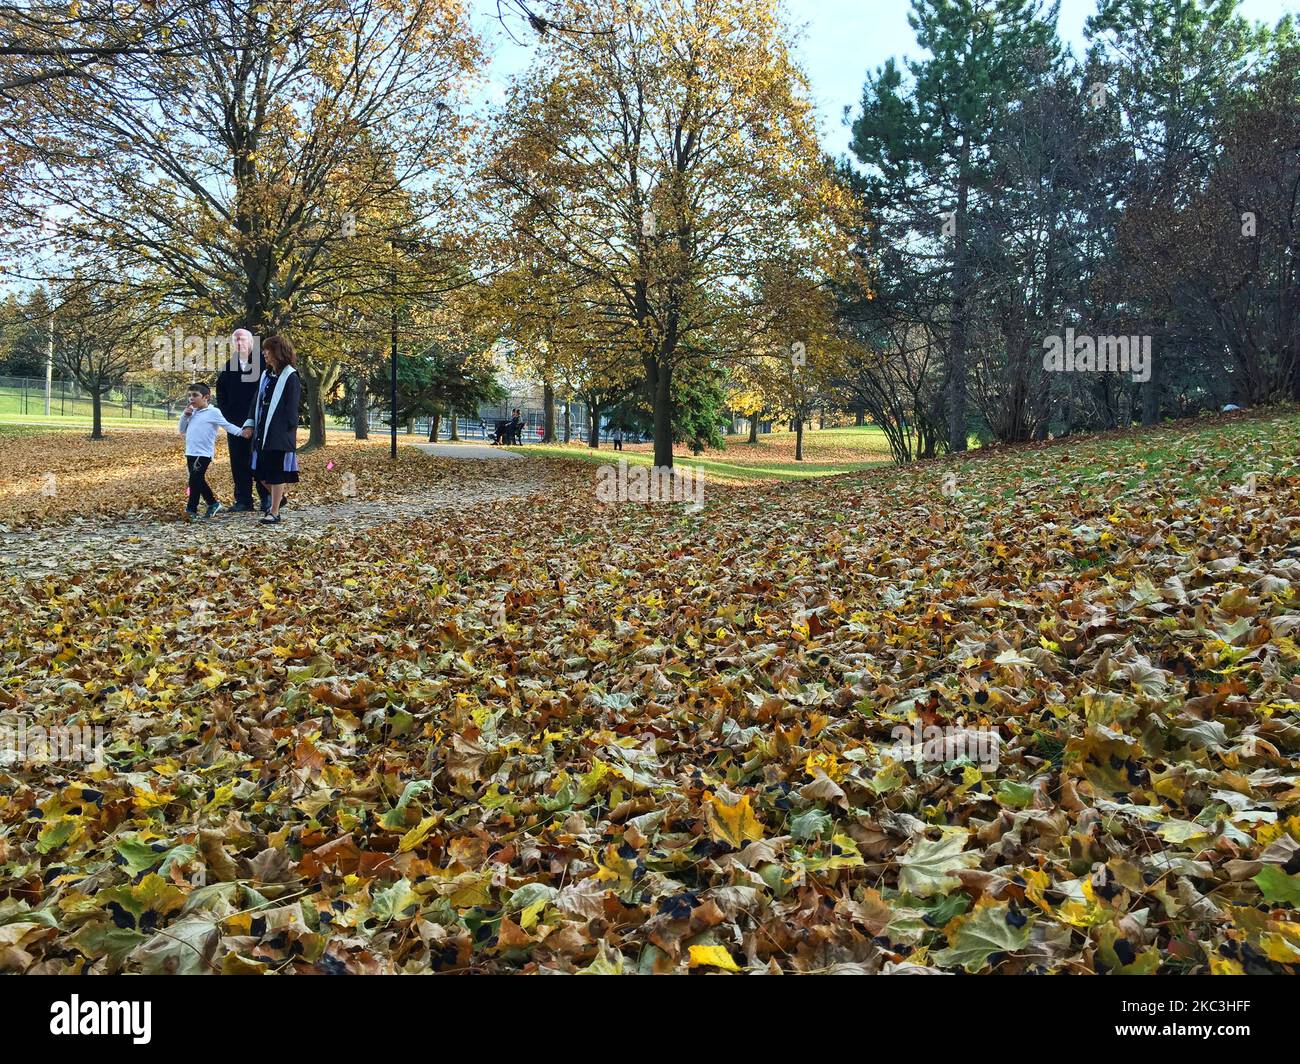 People walk amongst the Autumn leaves at a park in Toronto, Ontario, Canada, on November 07, 2020. Toronto is experiencing the warmest stretch of November weather in history with temperatures hitting a high of 20 degrees celsius. Friday's high of 20.8 °C broke the record of 20.5 °C set in 2015 and Sunday temperatures in Toronto are expected to reach 20°C. This trend will continue into the early days of next week as well. (Photo by Creative Touch Imaging Ltd./NurPhoto) Stock Photo